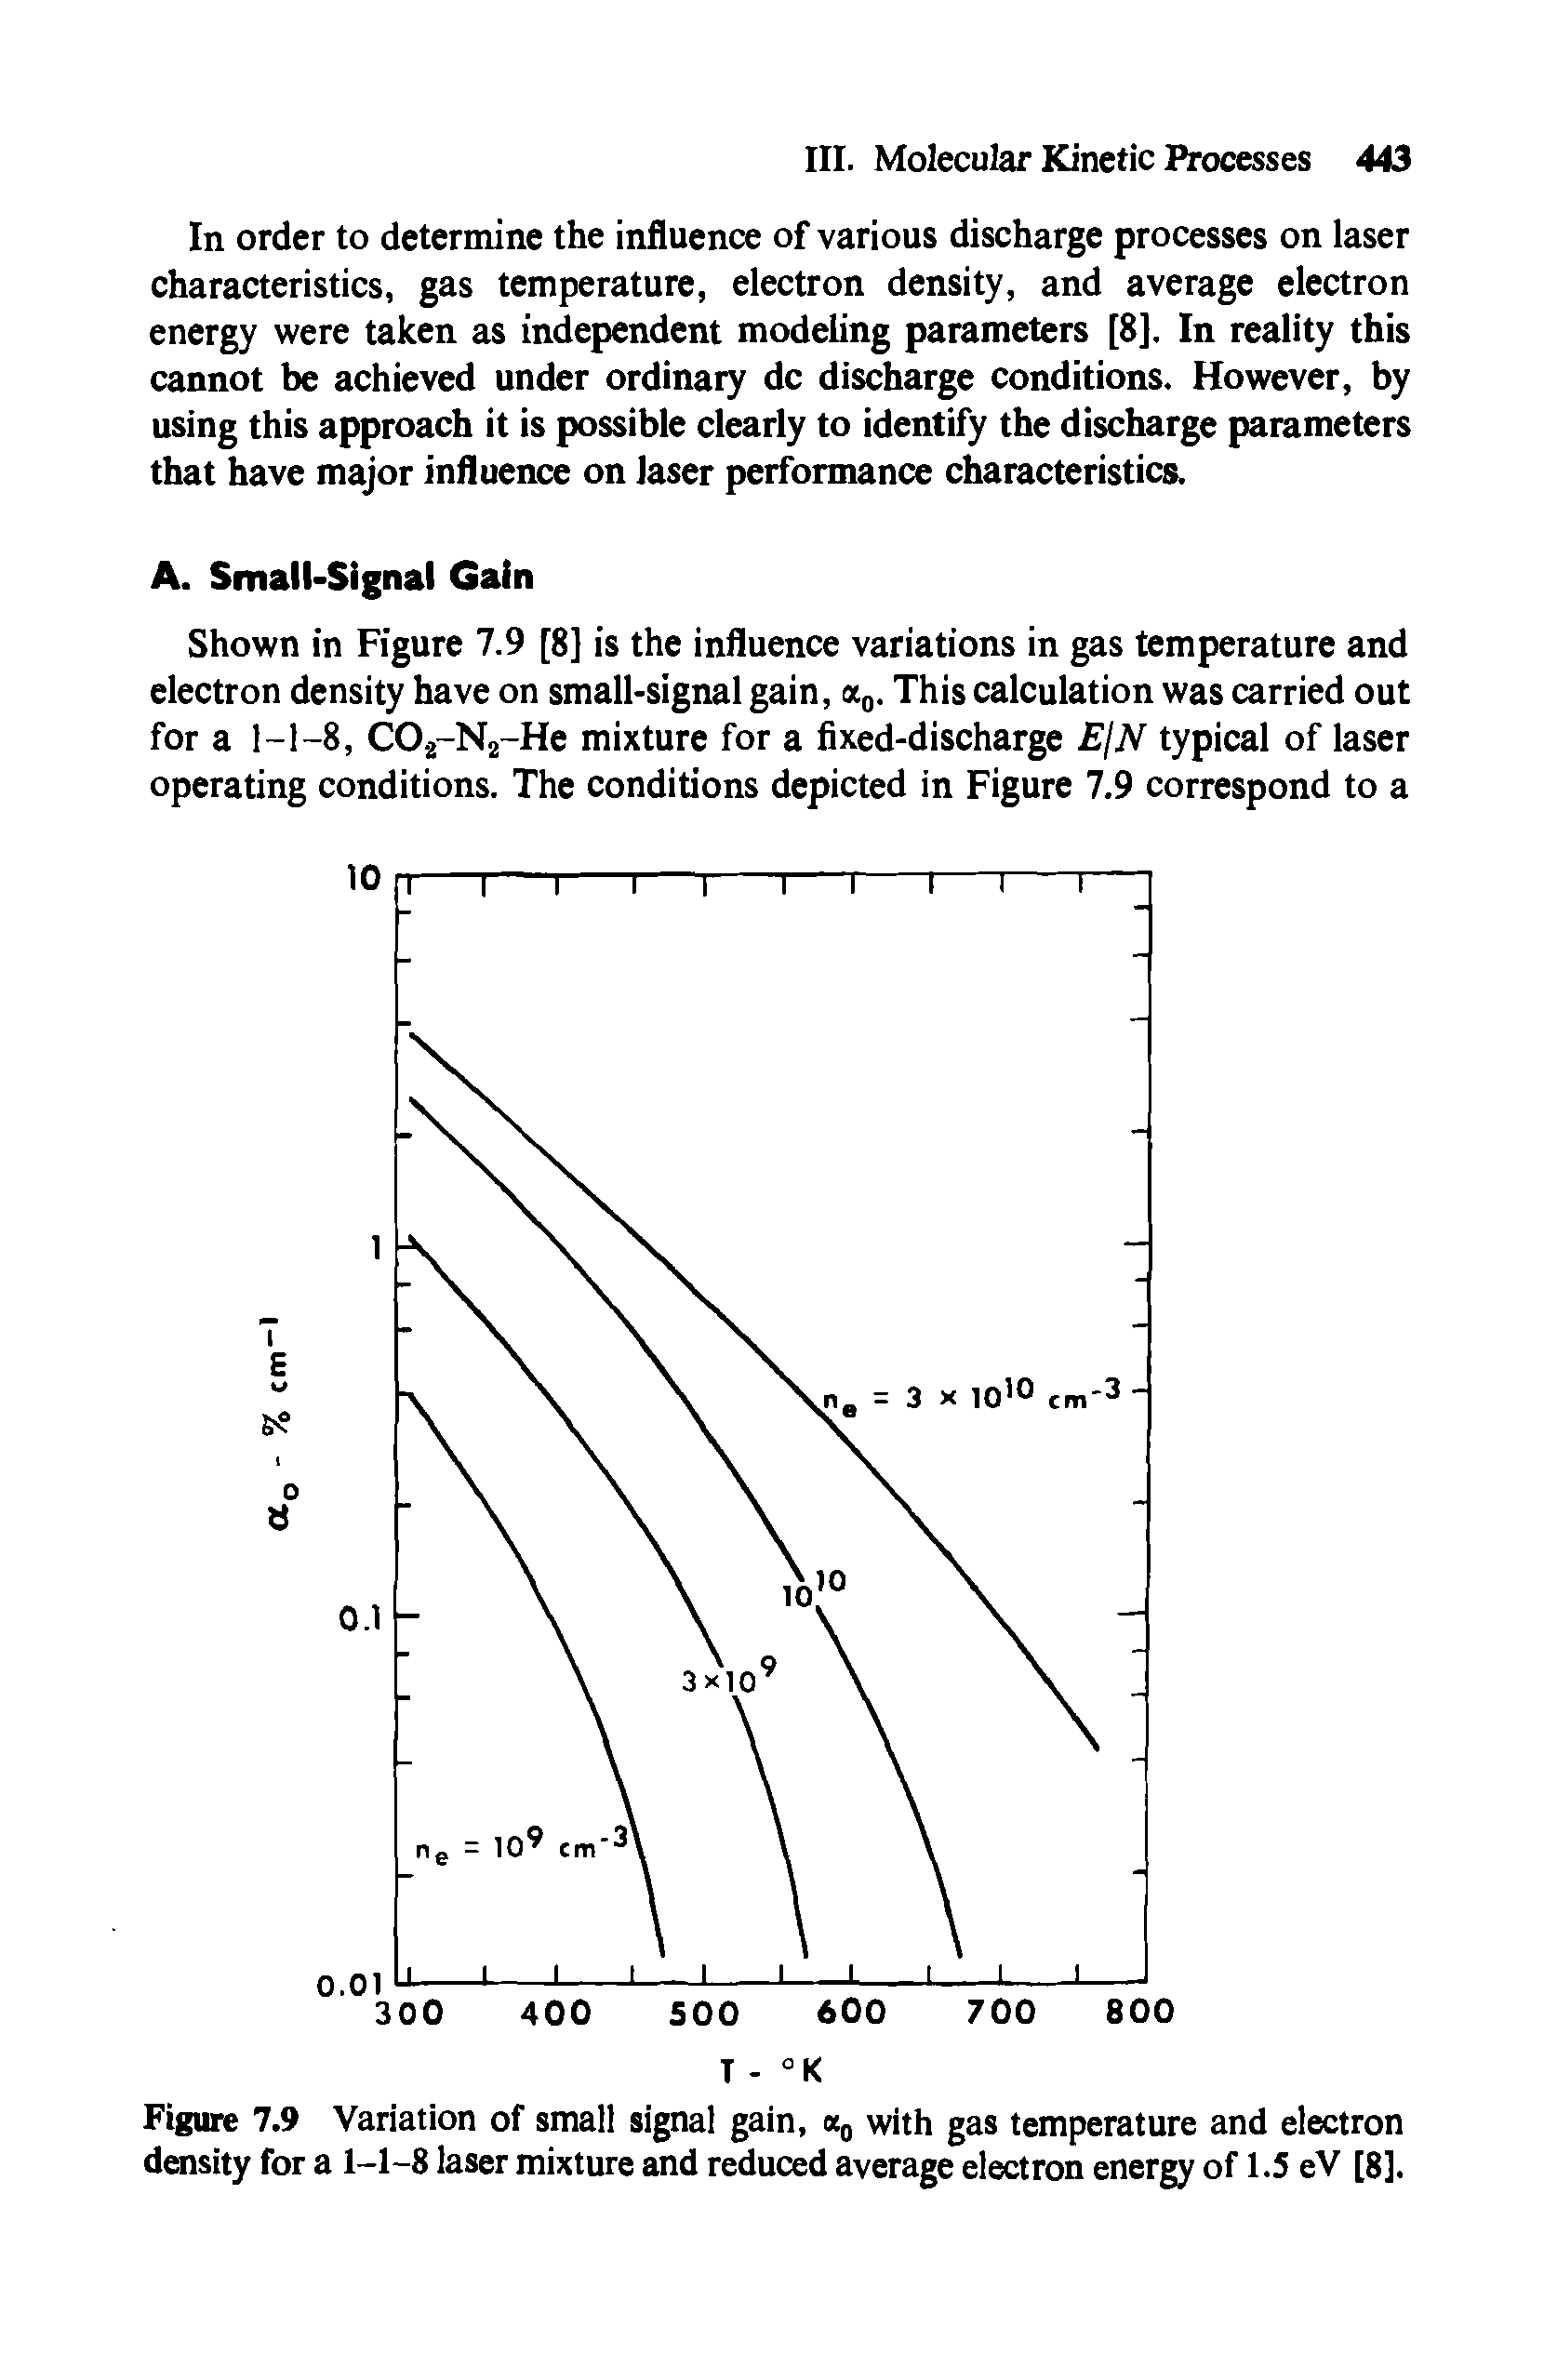 Figure 7.9 Variation of small signal gain, a0 with gas temperature and electron density for a 1-1-8 laser mixture and reduced average electron energy of 1.5 eV [8].